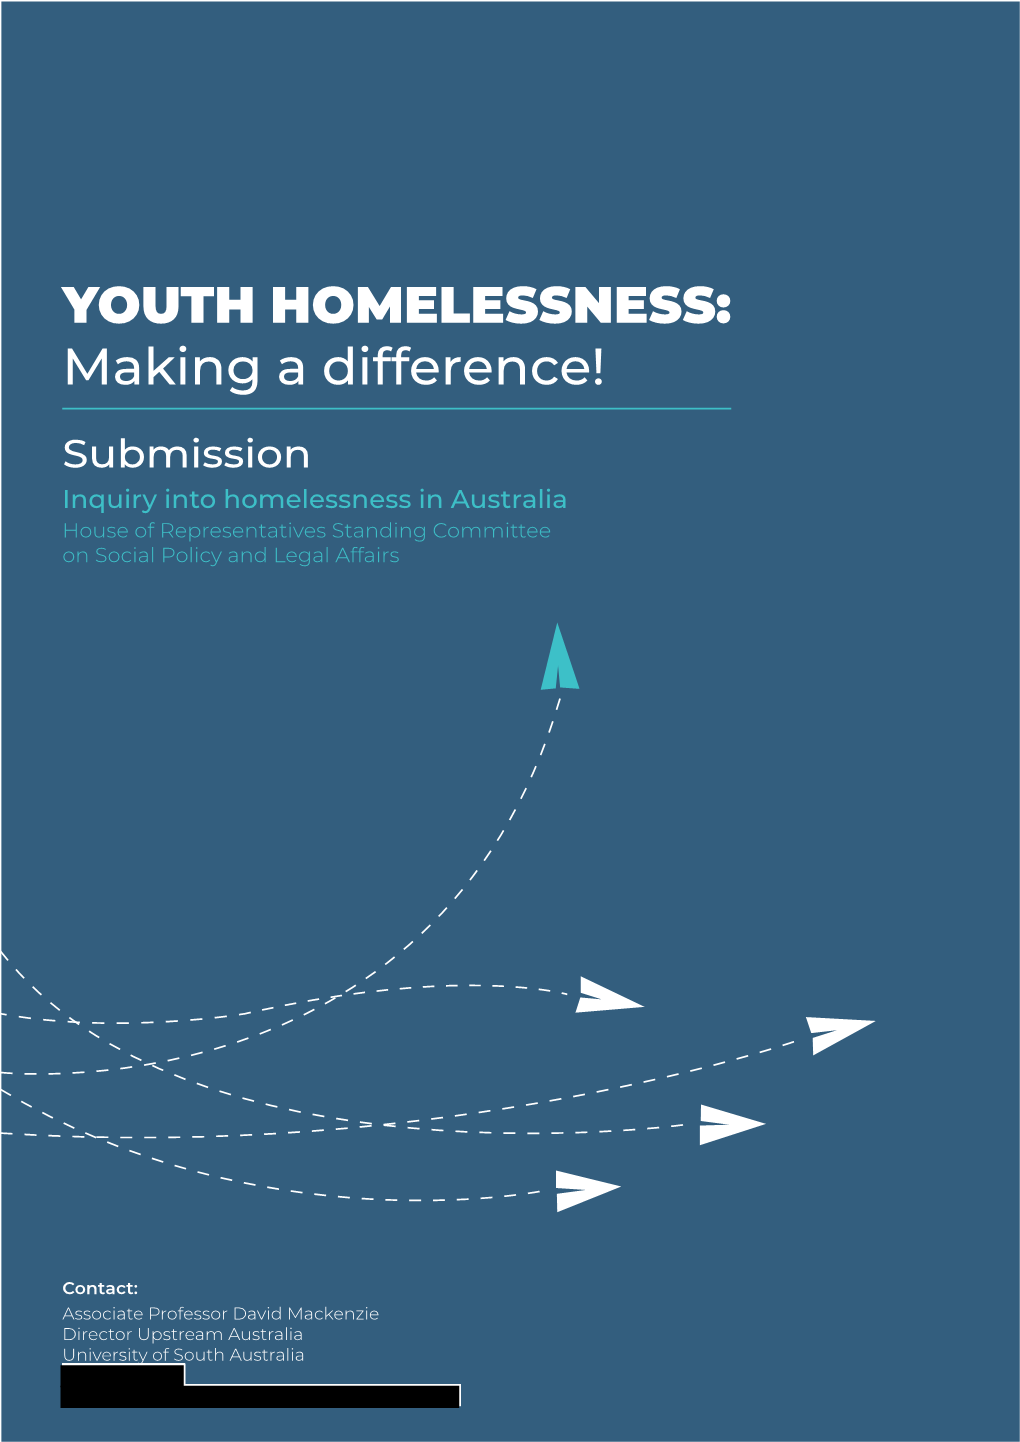 YOUTH HOMELESSNESS: Making a Difference!